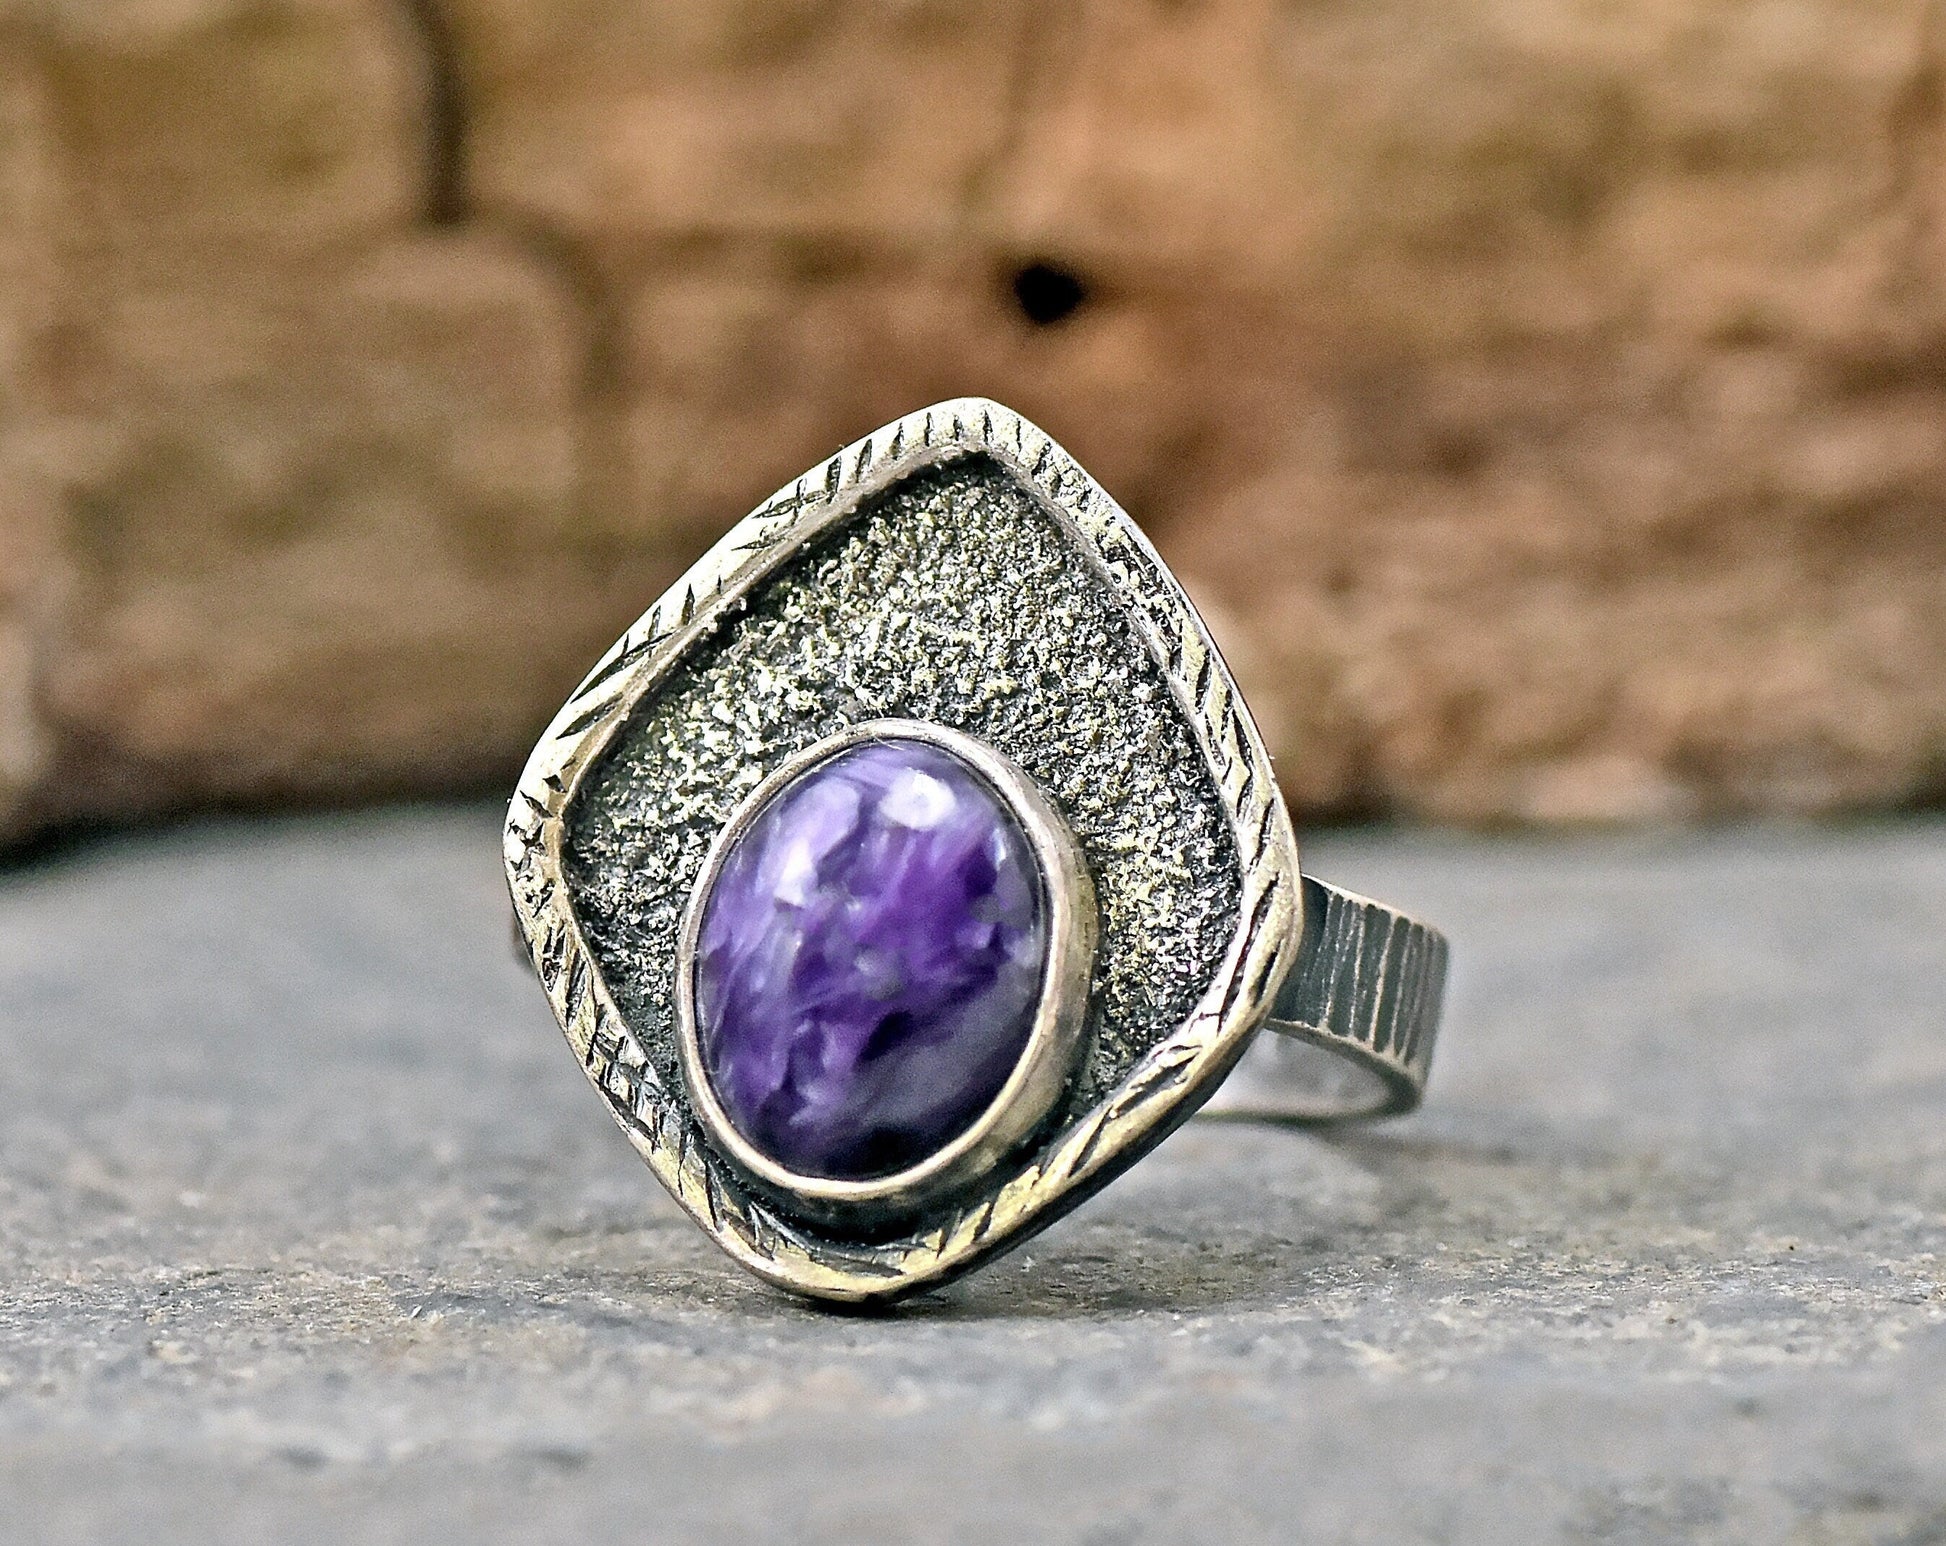 Charoite Ring Size 7, Sterling Silver Unique Purple Gemstone Jewelry, Rustic Texture Artisan Handmade